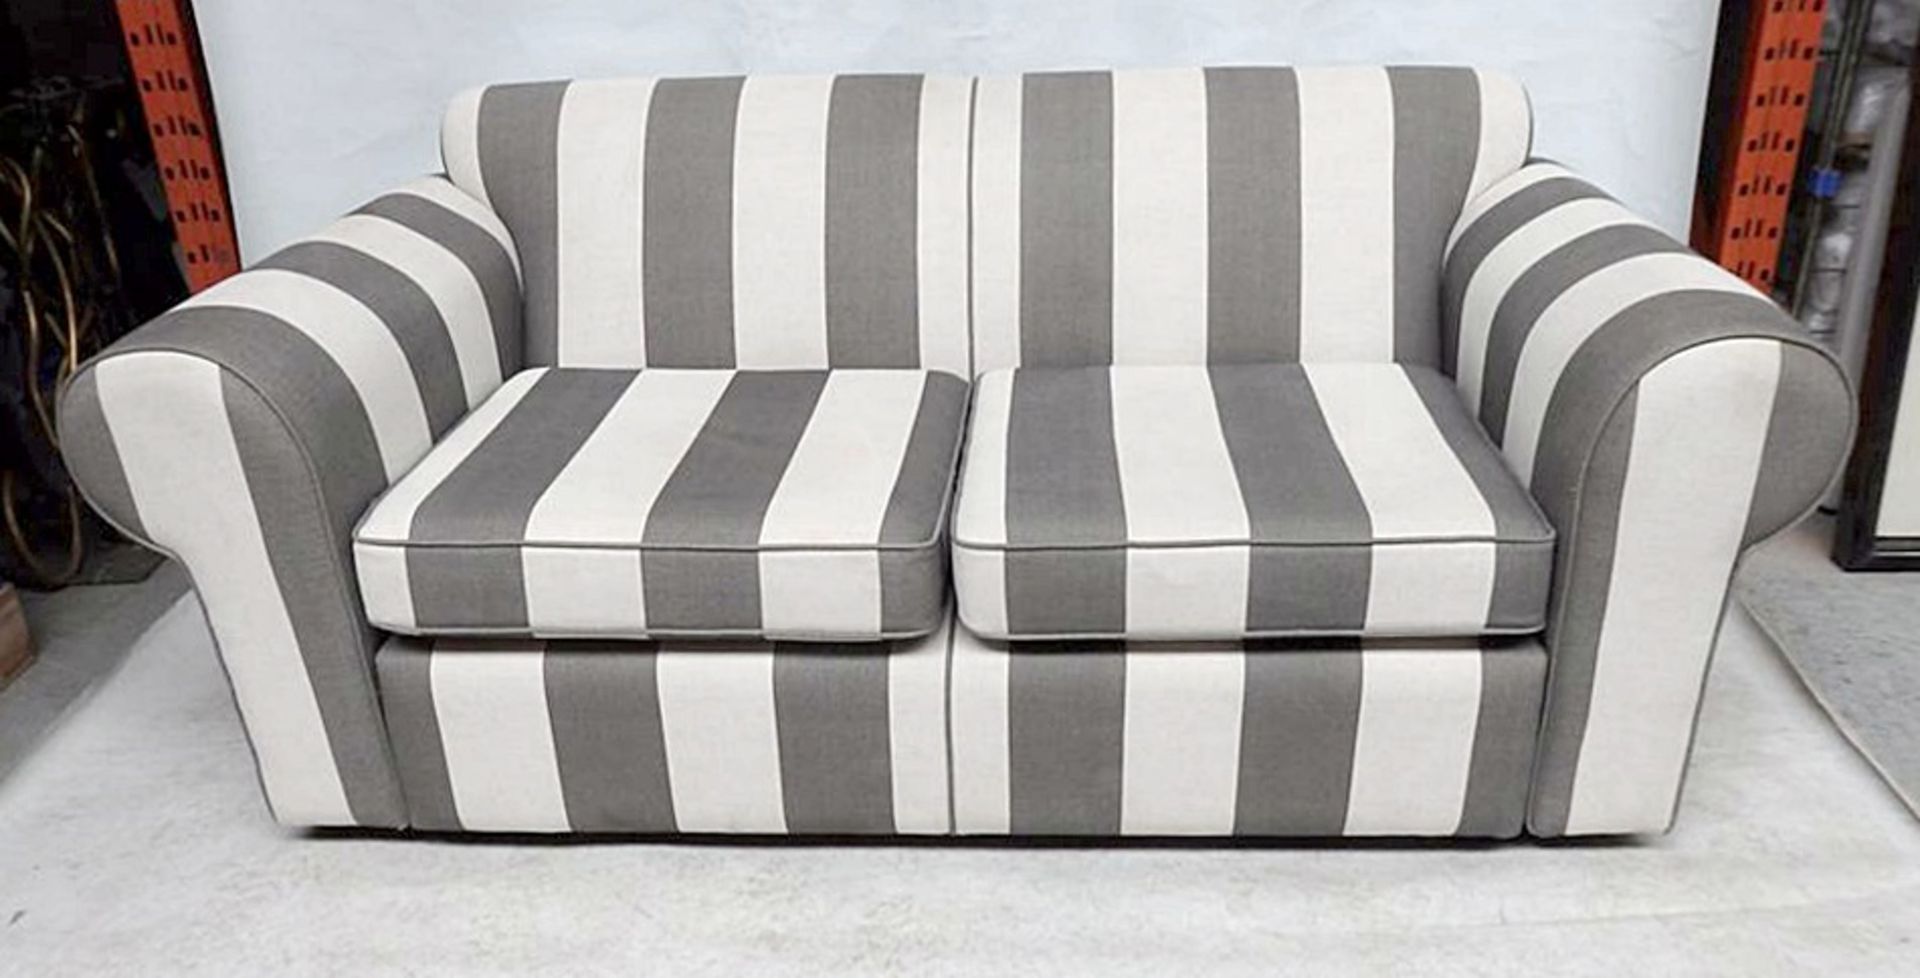 1 x Sumptuous Bespoke Cream & Grey Striped Sofa - Expertly Built And Upholstered By British